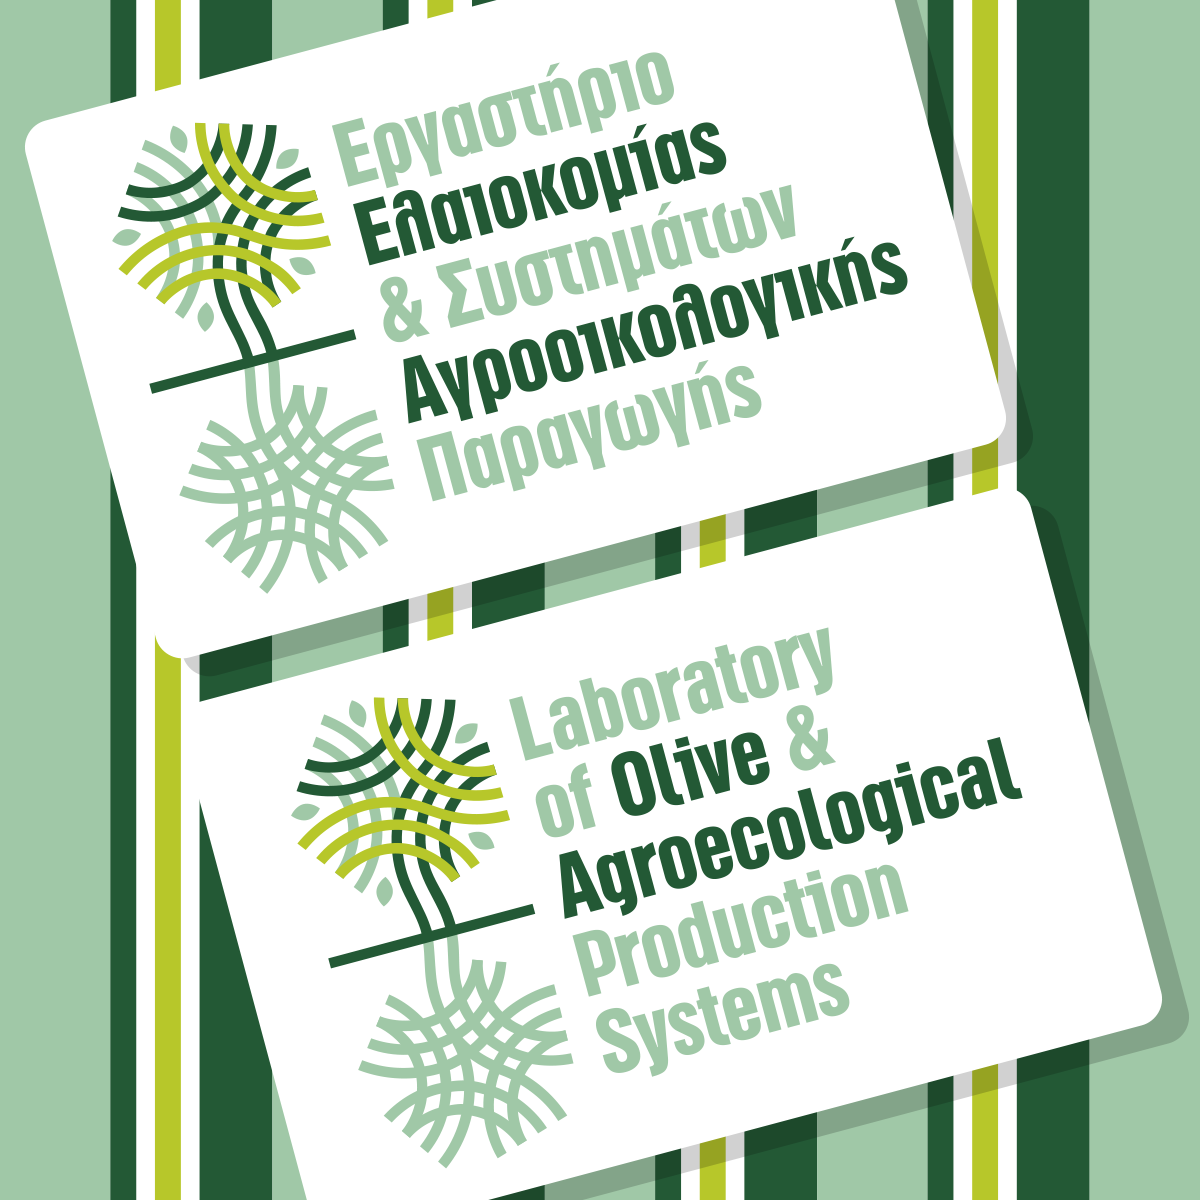 Laboratory of Olive growing & Agroecological Production Systems